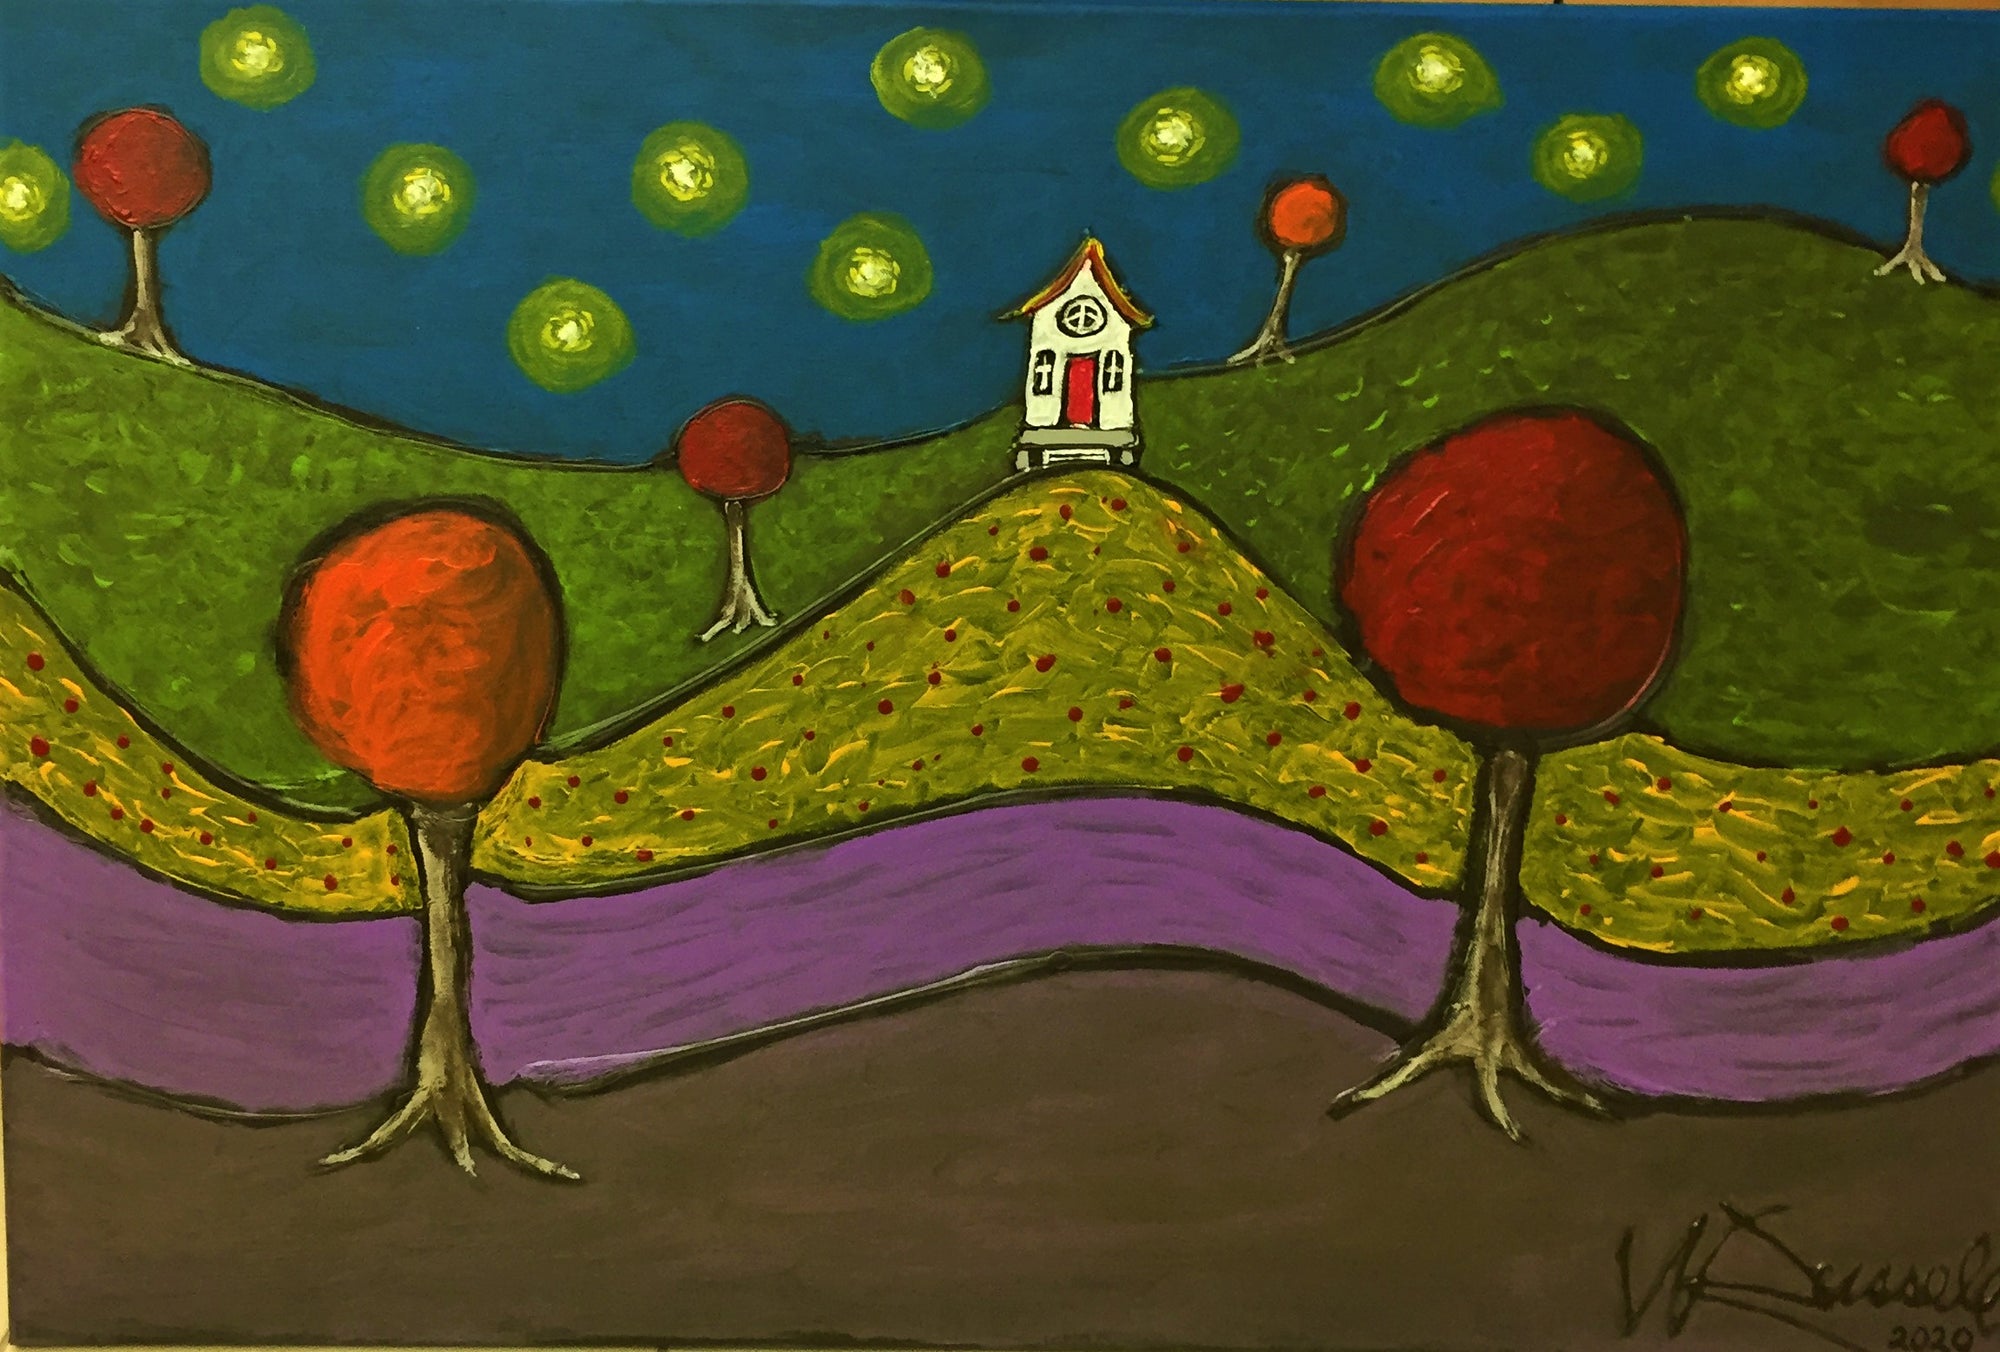 "House On The Hill"  - 24" x 36" Original by Wayne Russell